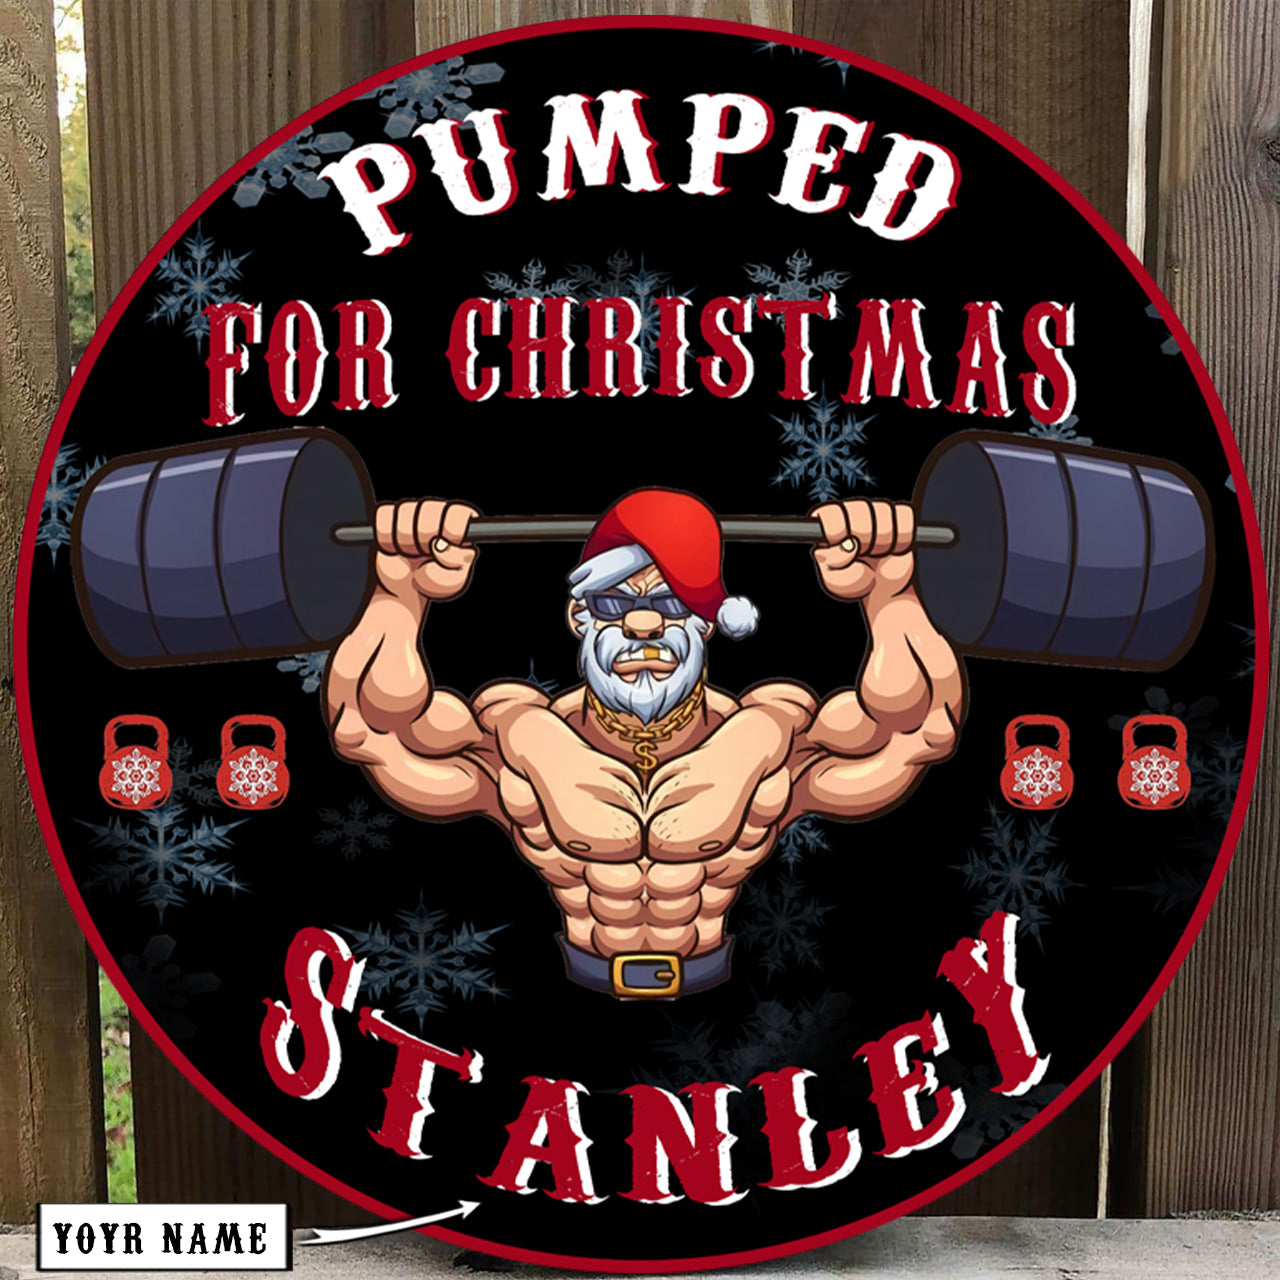 Personalized Gym Pumped for Christmas Round Wooden